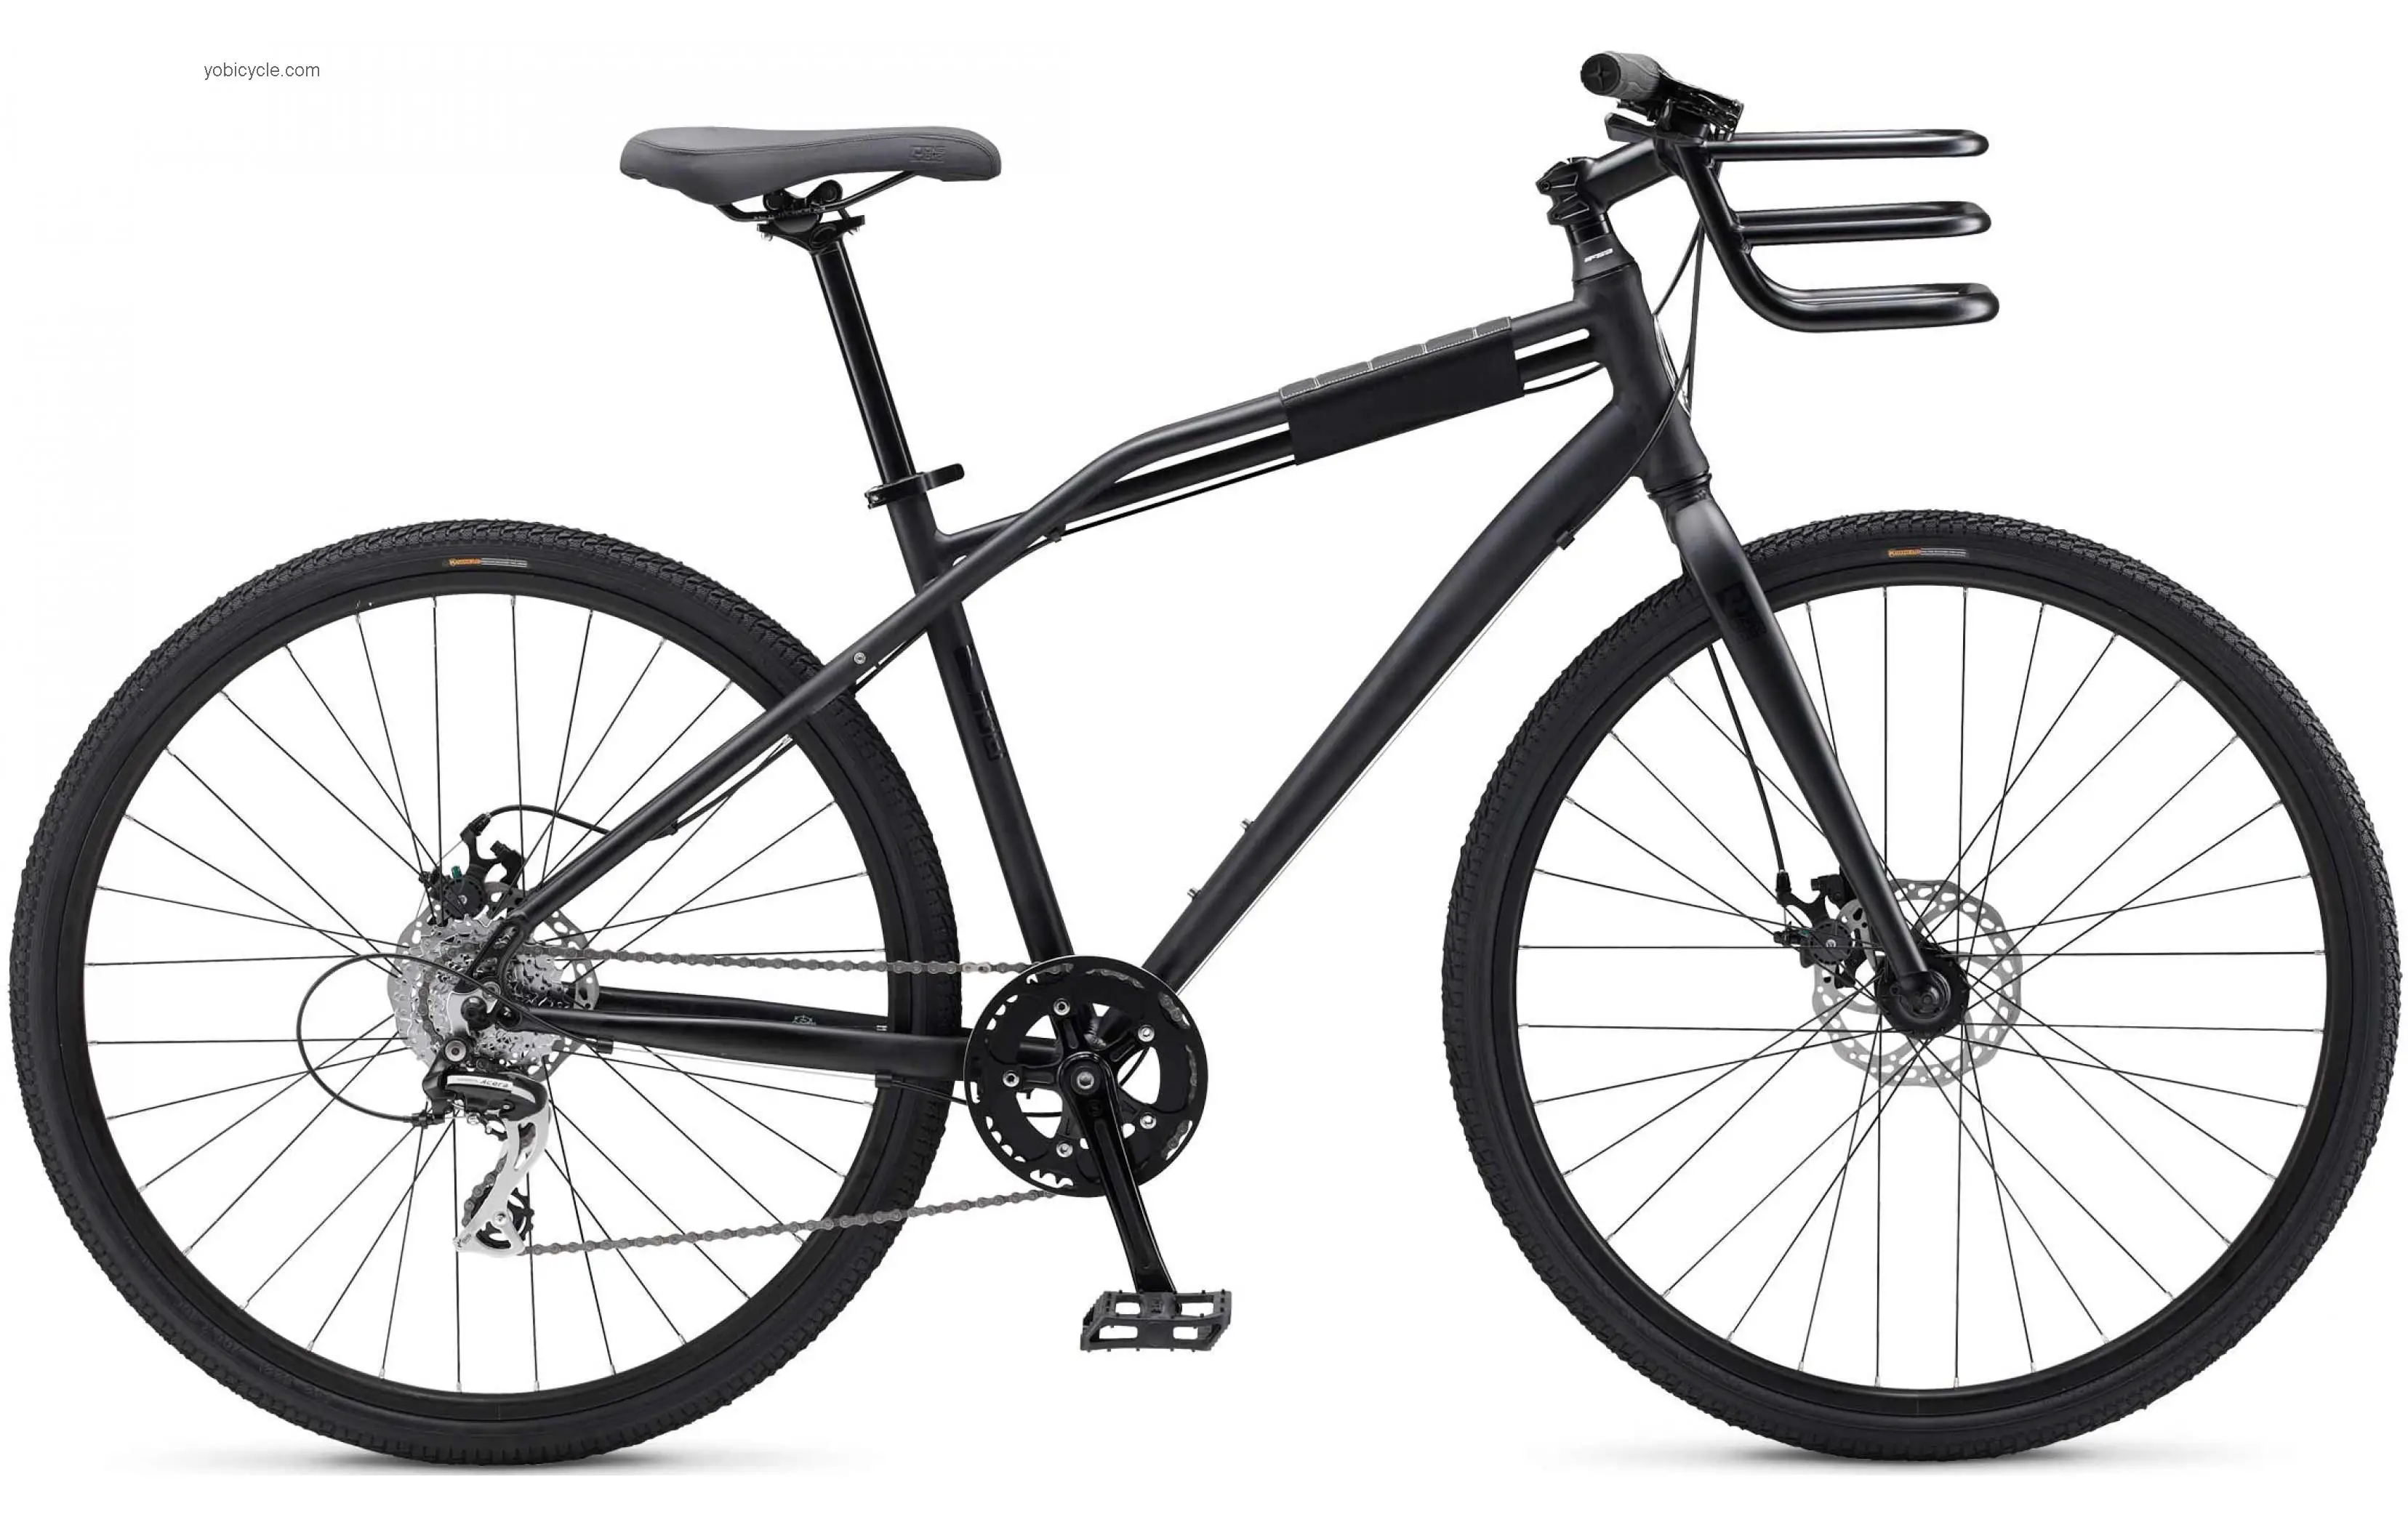 Schwinn 4 One One 3 2013 comparison online with competitors